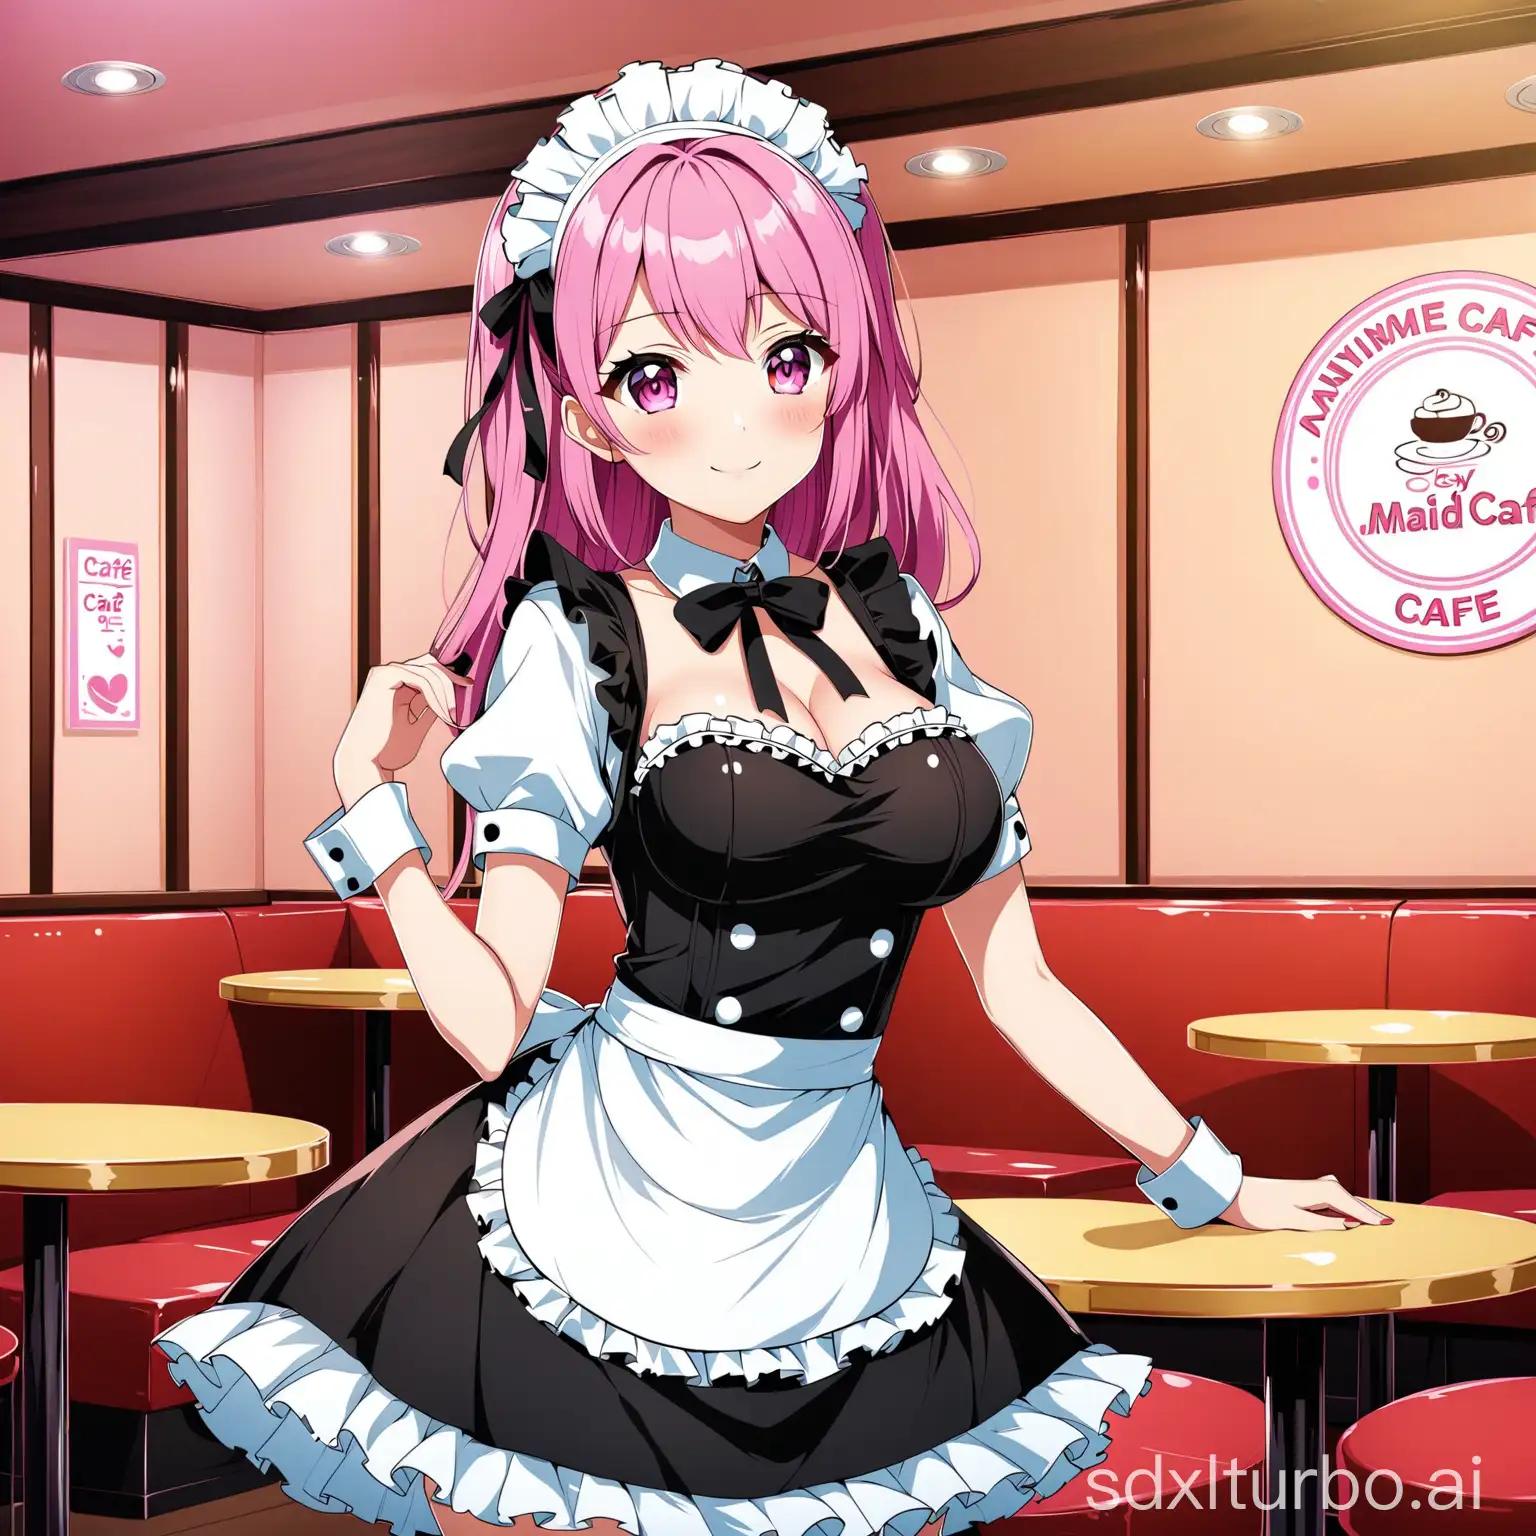 sexy anime maid cafe background